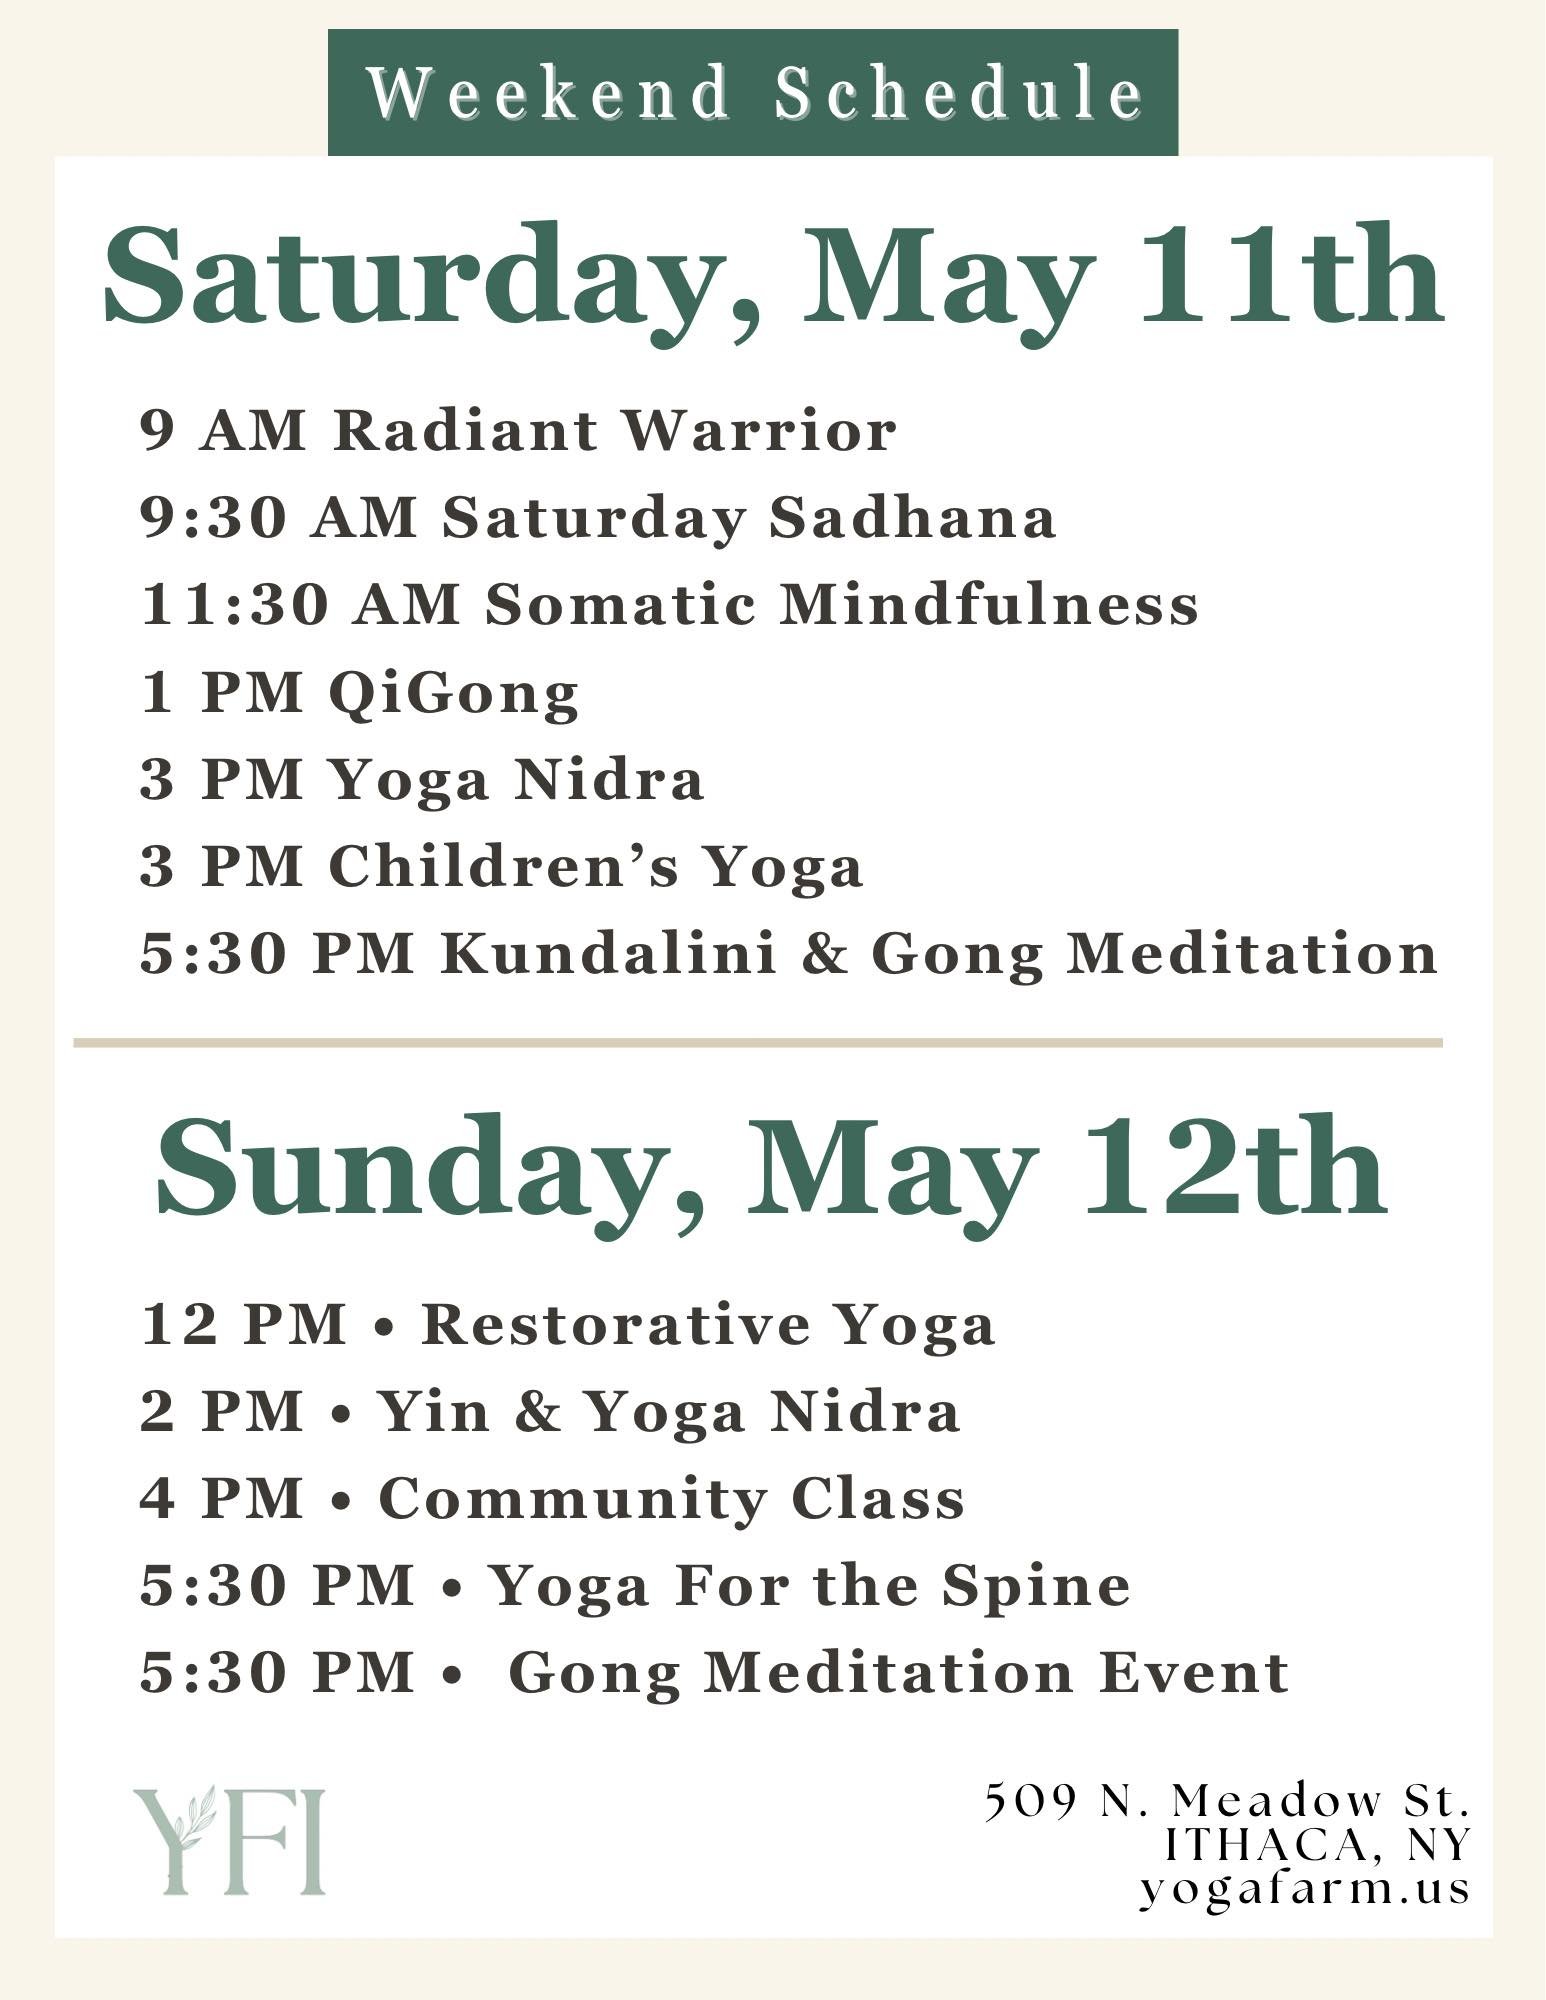 Tell us your plans for this weekend!? 🙏✨🌳 
Join us for a class or two! 🌈🌟

https://www.yogafarm.us/ithaca-studio-classes